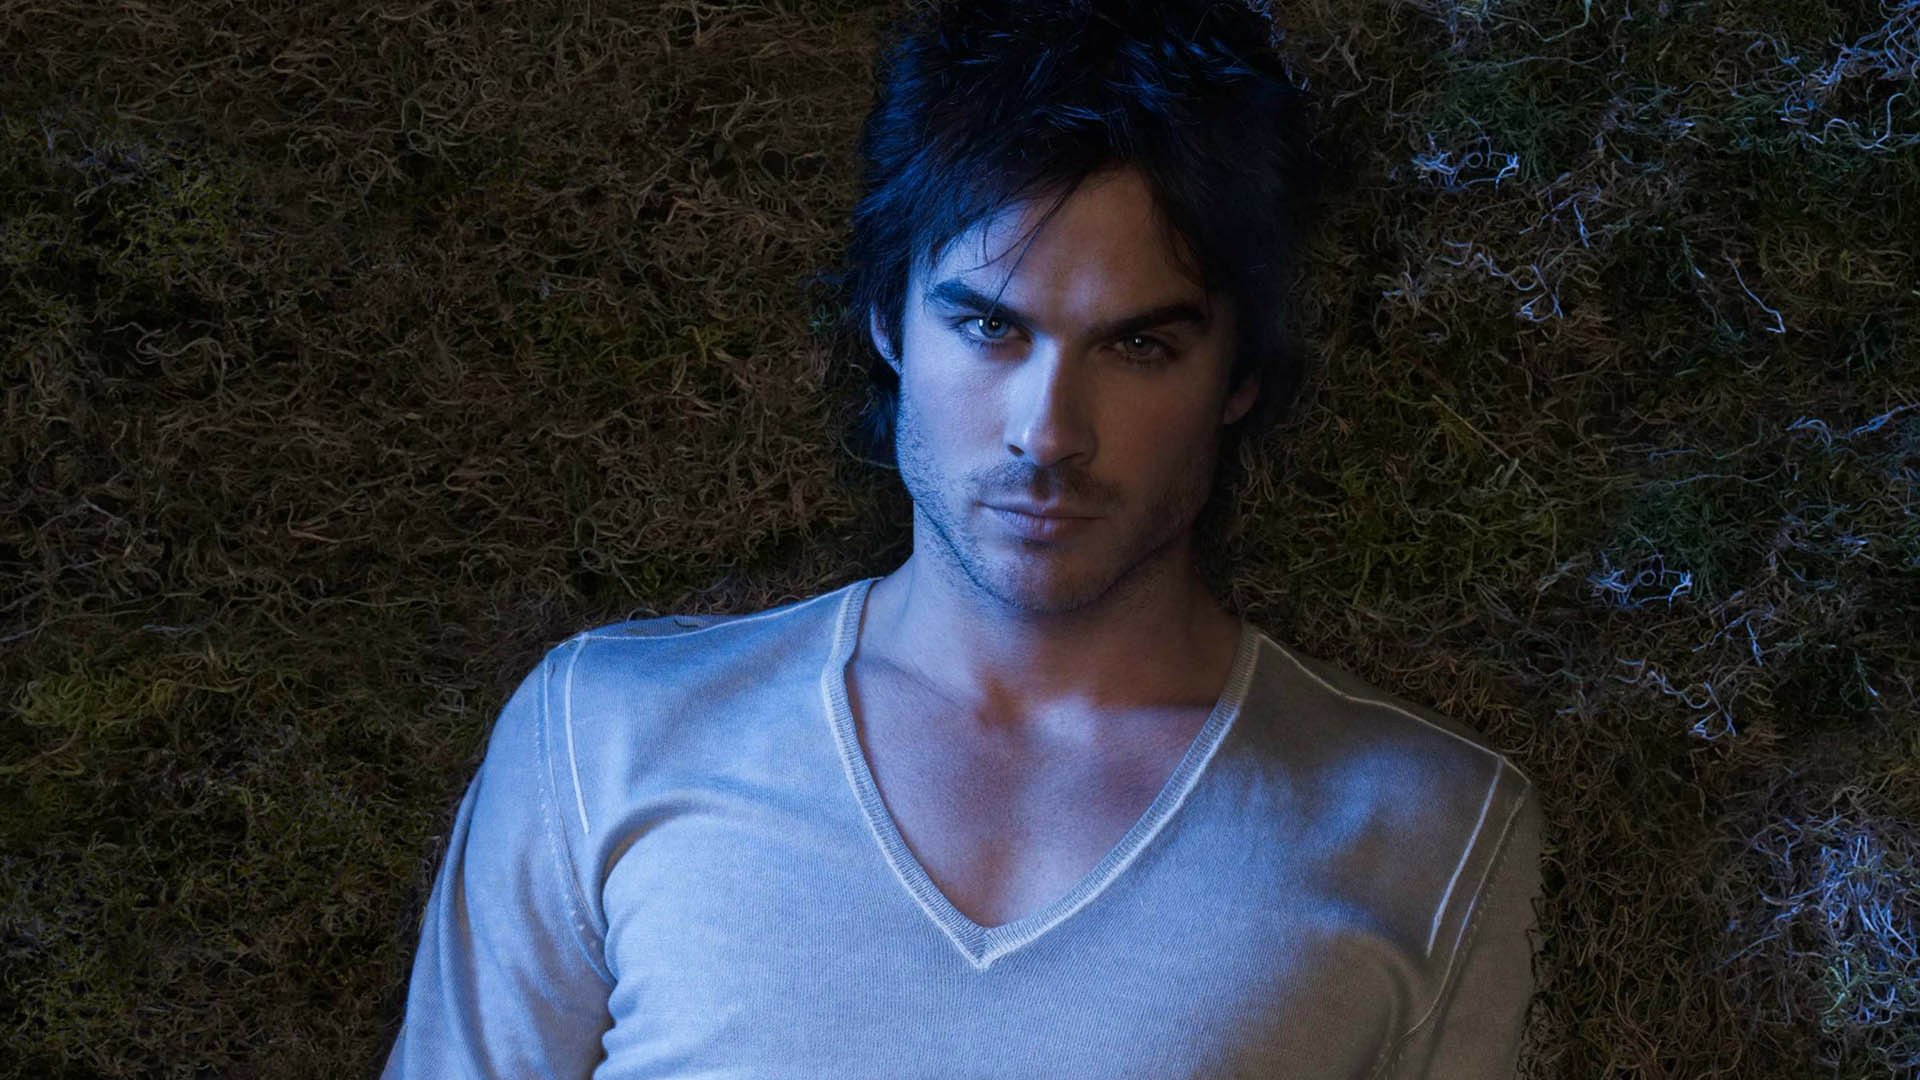 Ian Somerhalder HD Wallpapers and Backgrounds